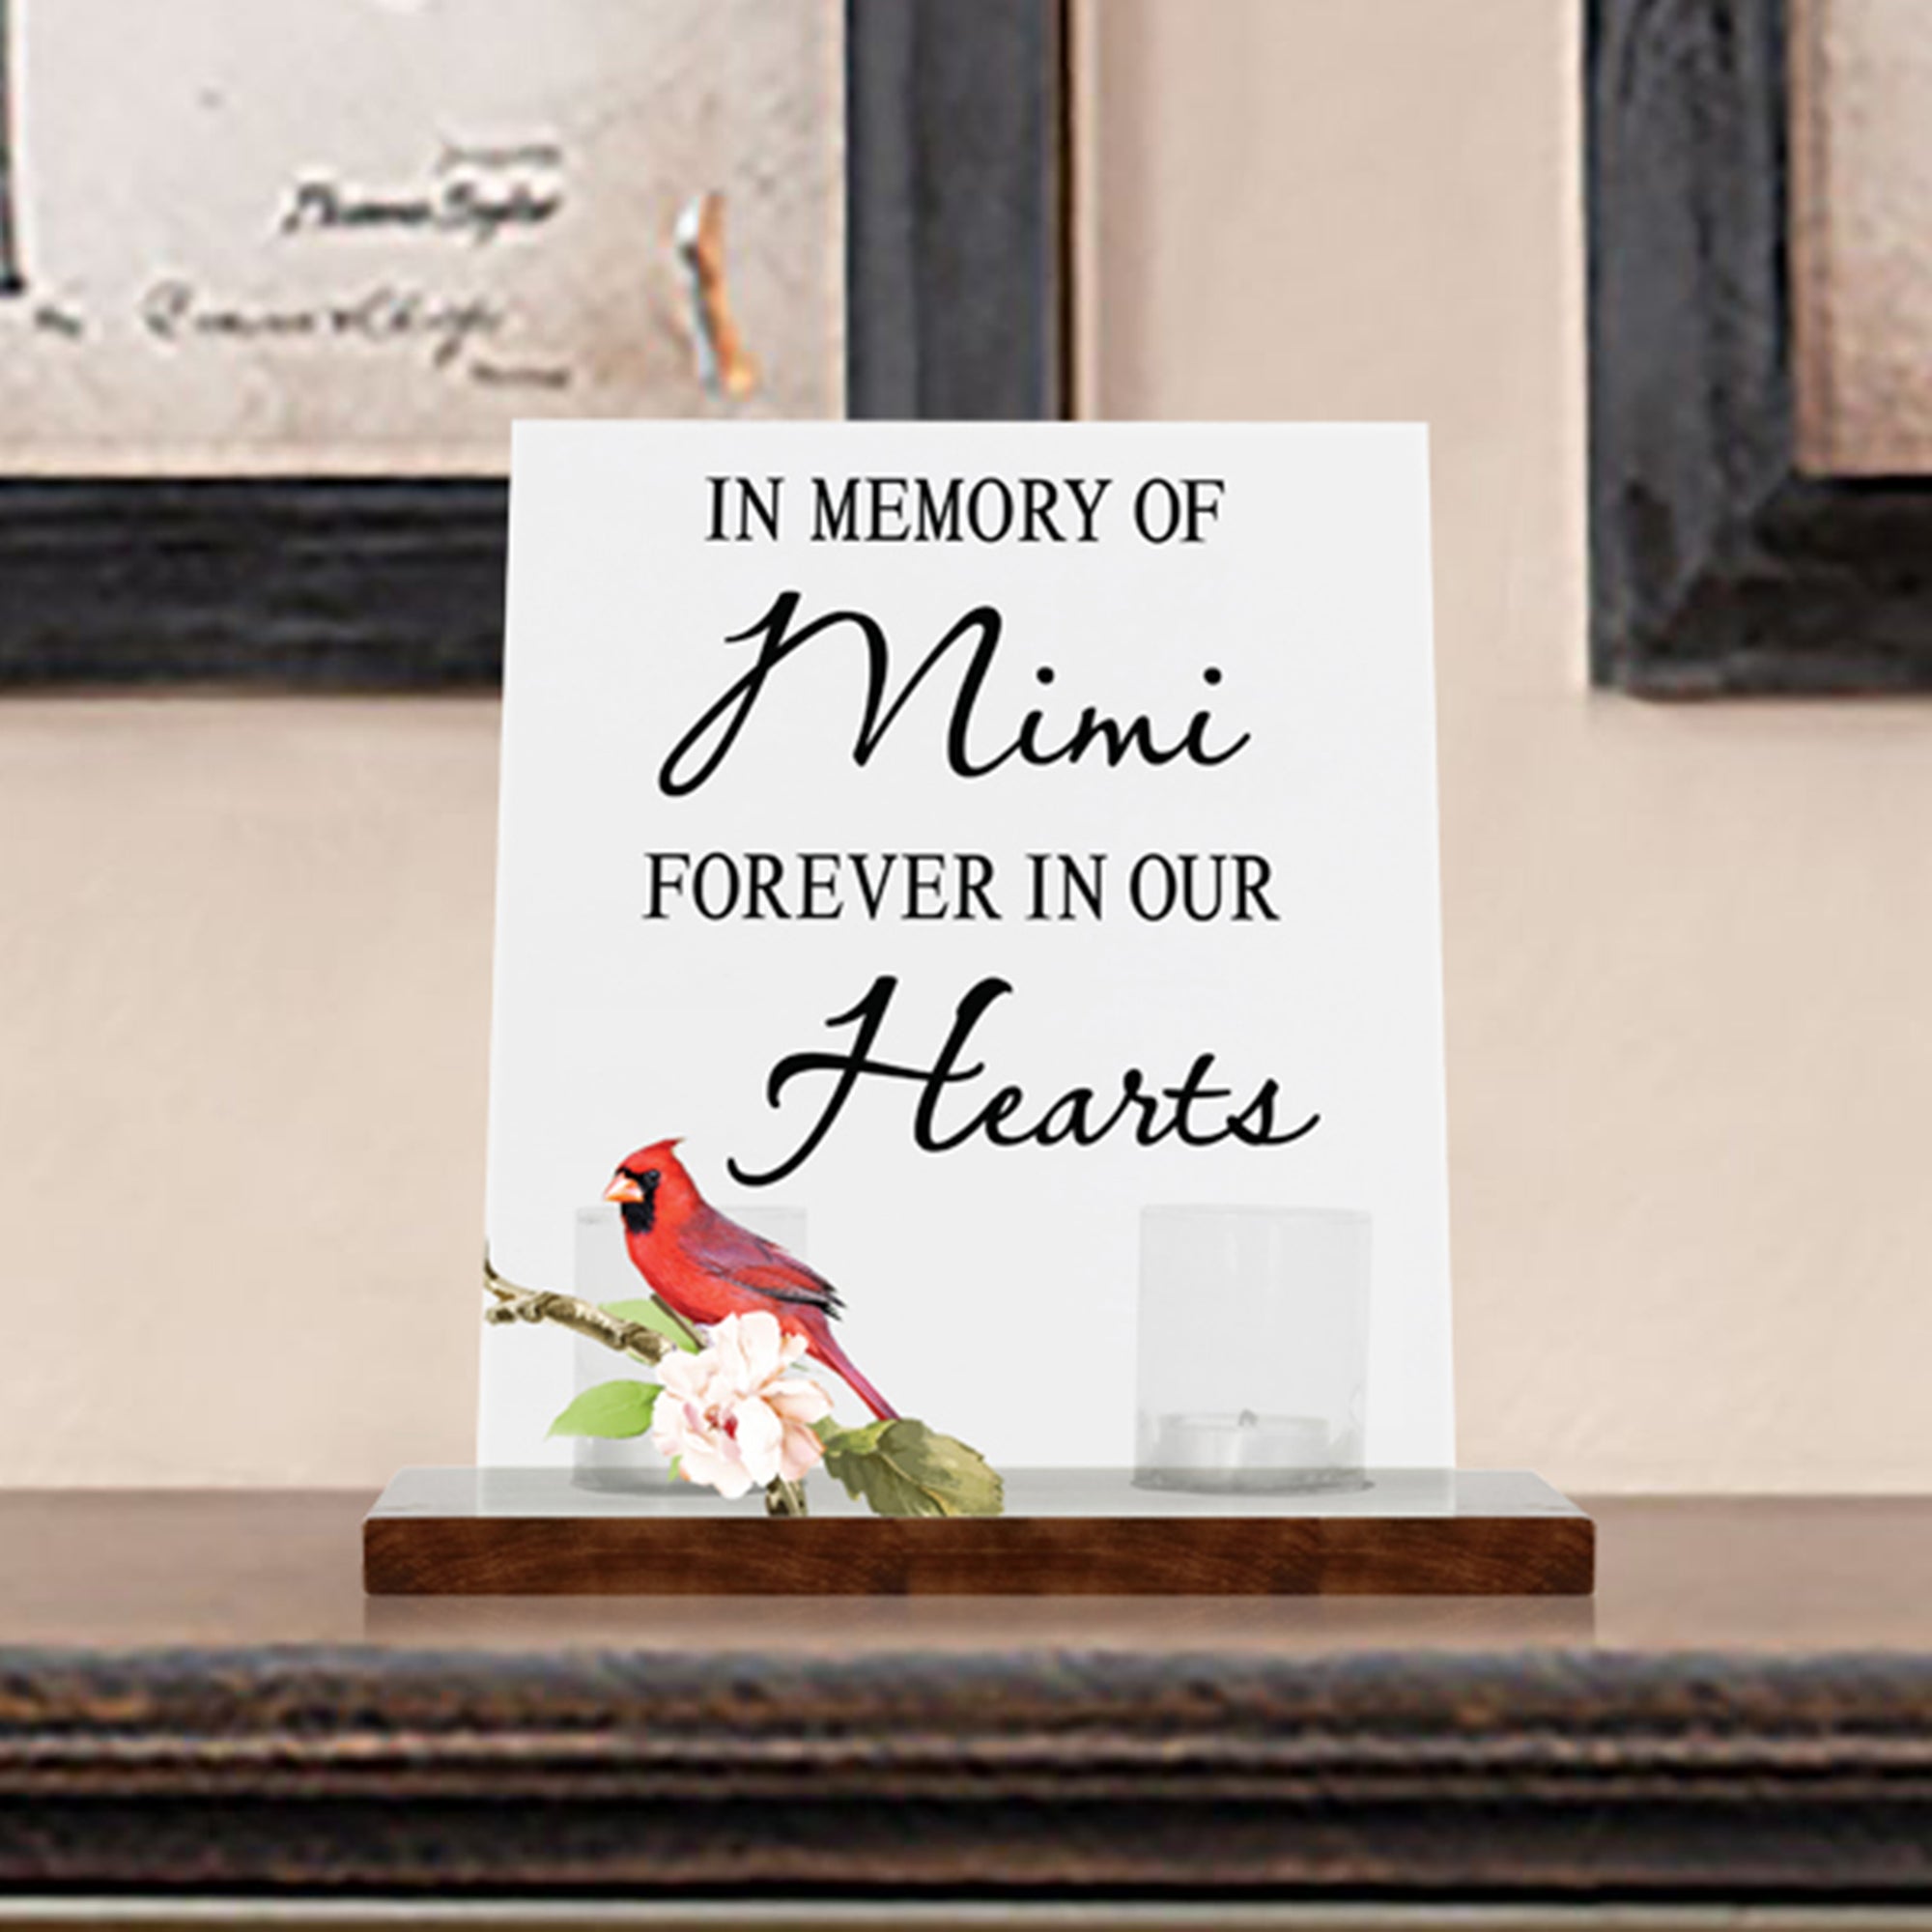 LifeSong Memorials Vintage Memorial Cardinal Acrylic Sign Candle Holder With Wood Base And Glass Votives For Home Decor | In Memory Of Mimi. Acrylic candle holders, Vintage acrylic candle holders, glass candle holders for Living Room, Bedroom, Kitchen, Dining Room, and Entryways decor perfect memorial bereavement keepsake gift ideas for Family & Friends.